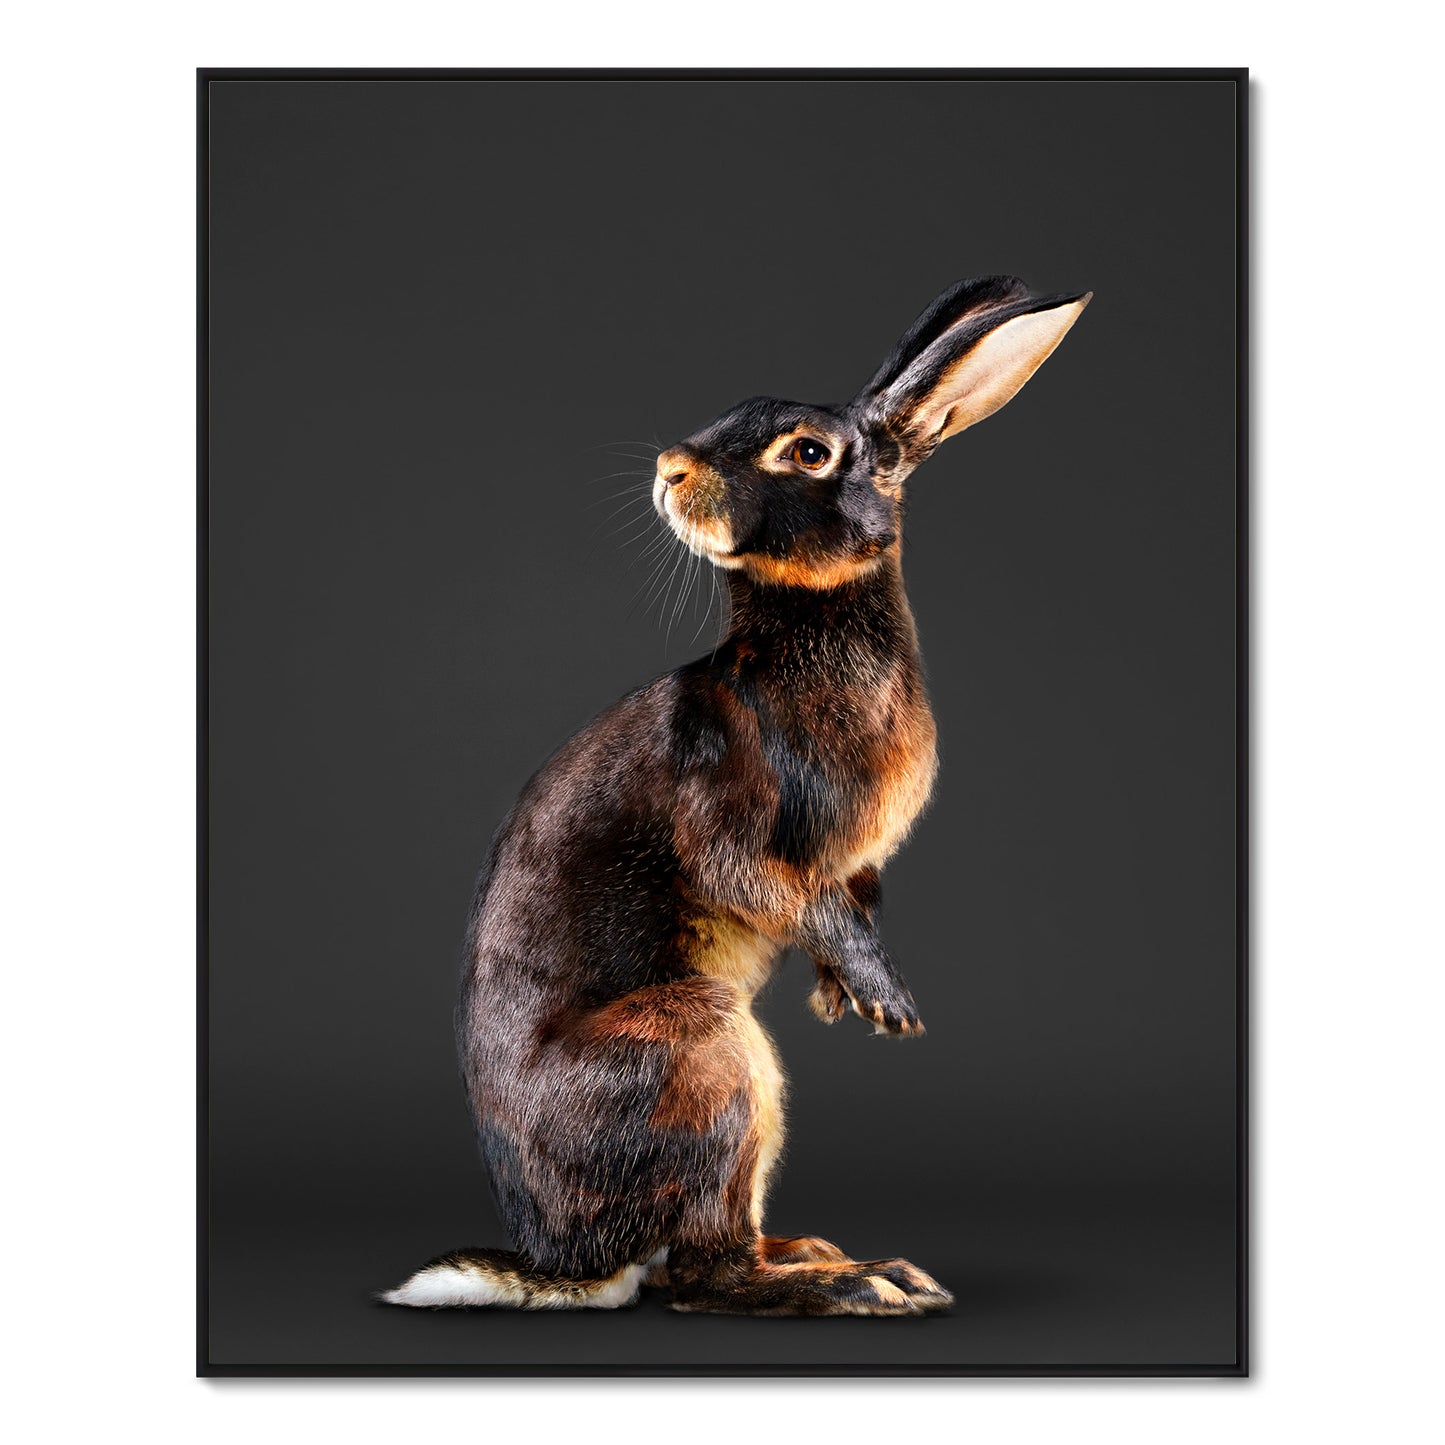 Jack the Belgian Hare